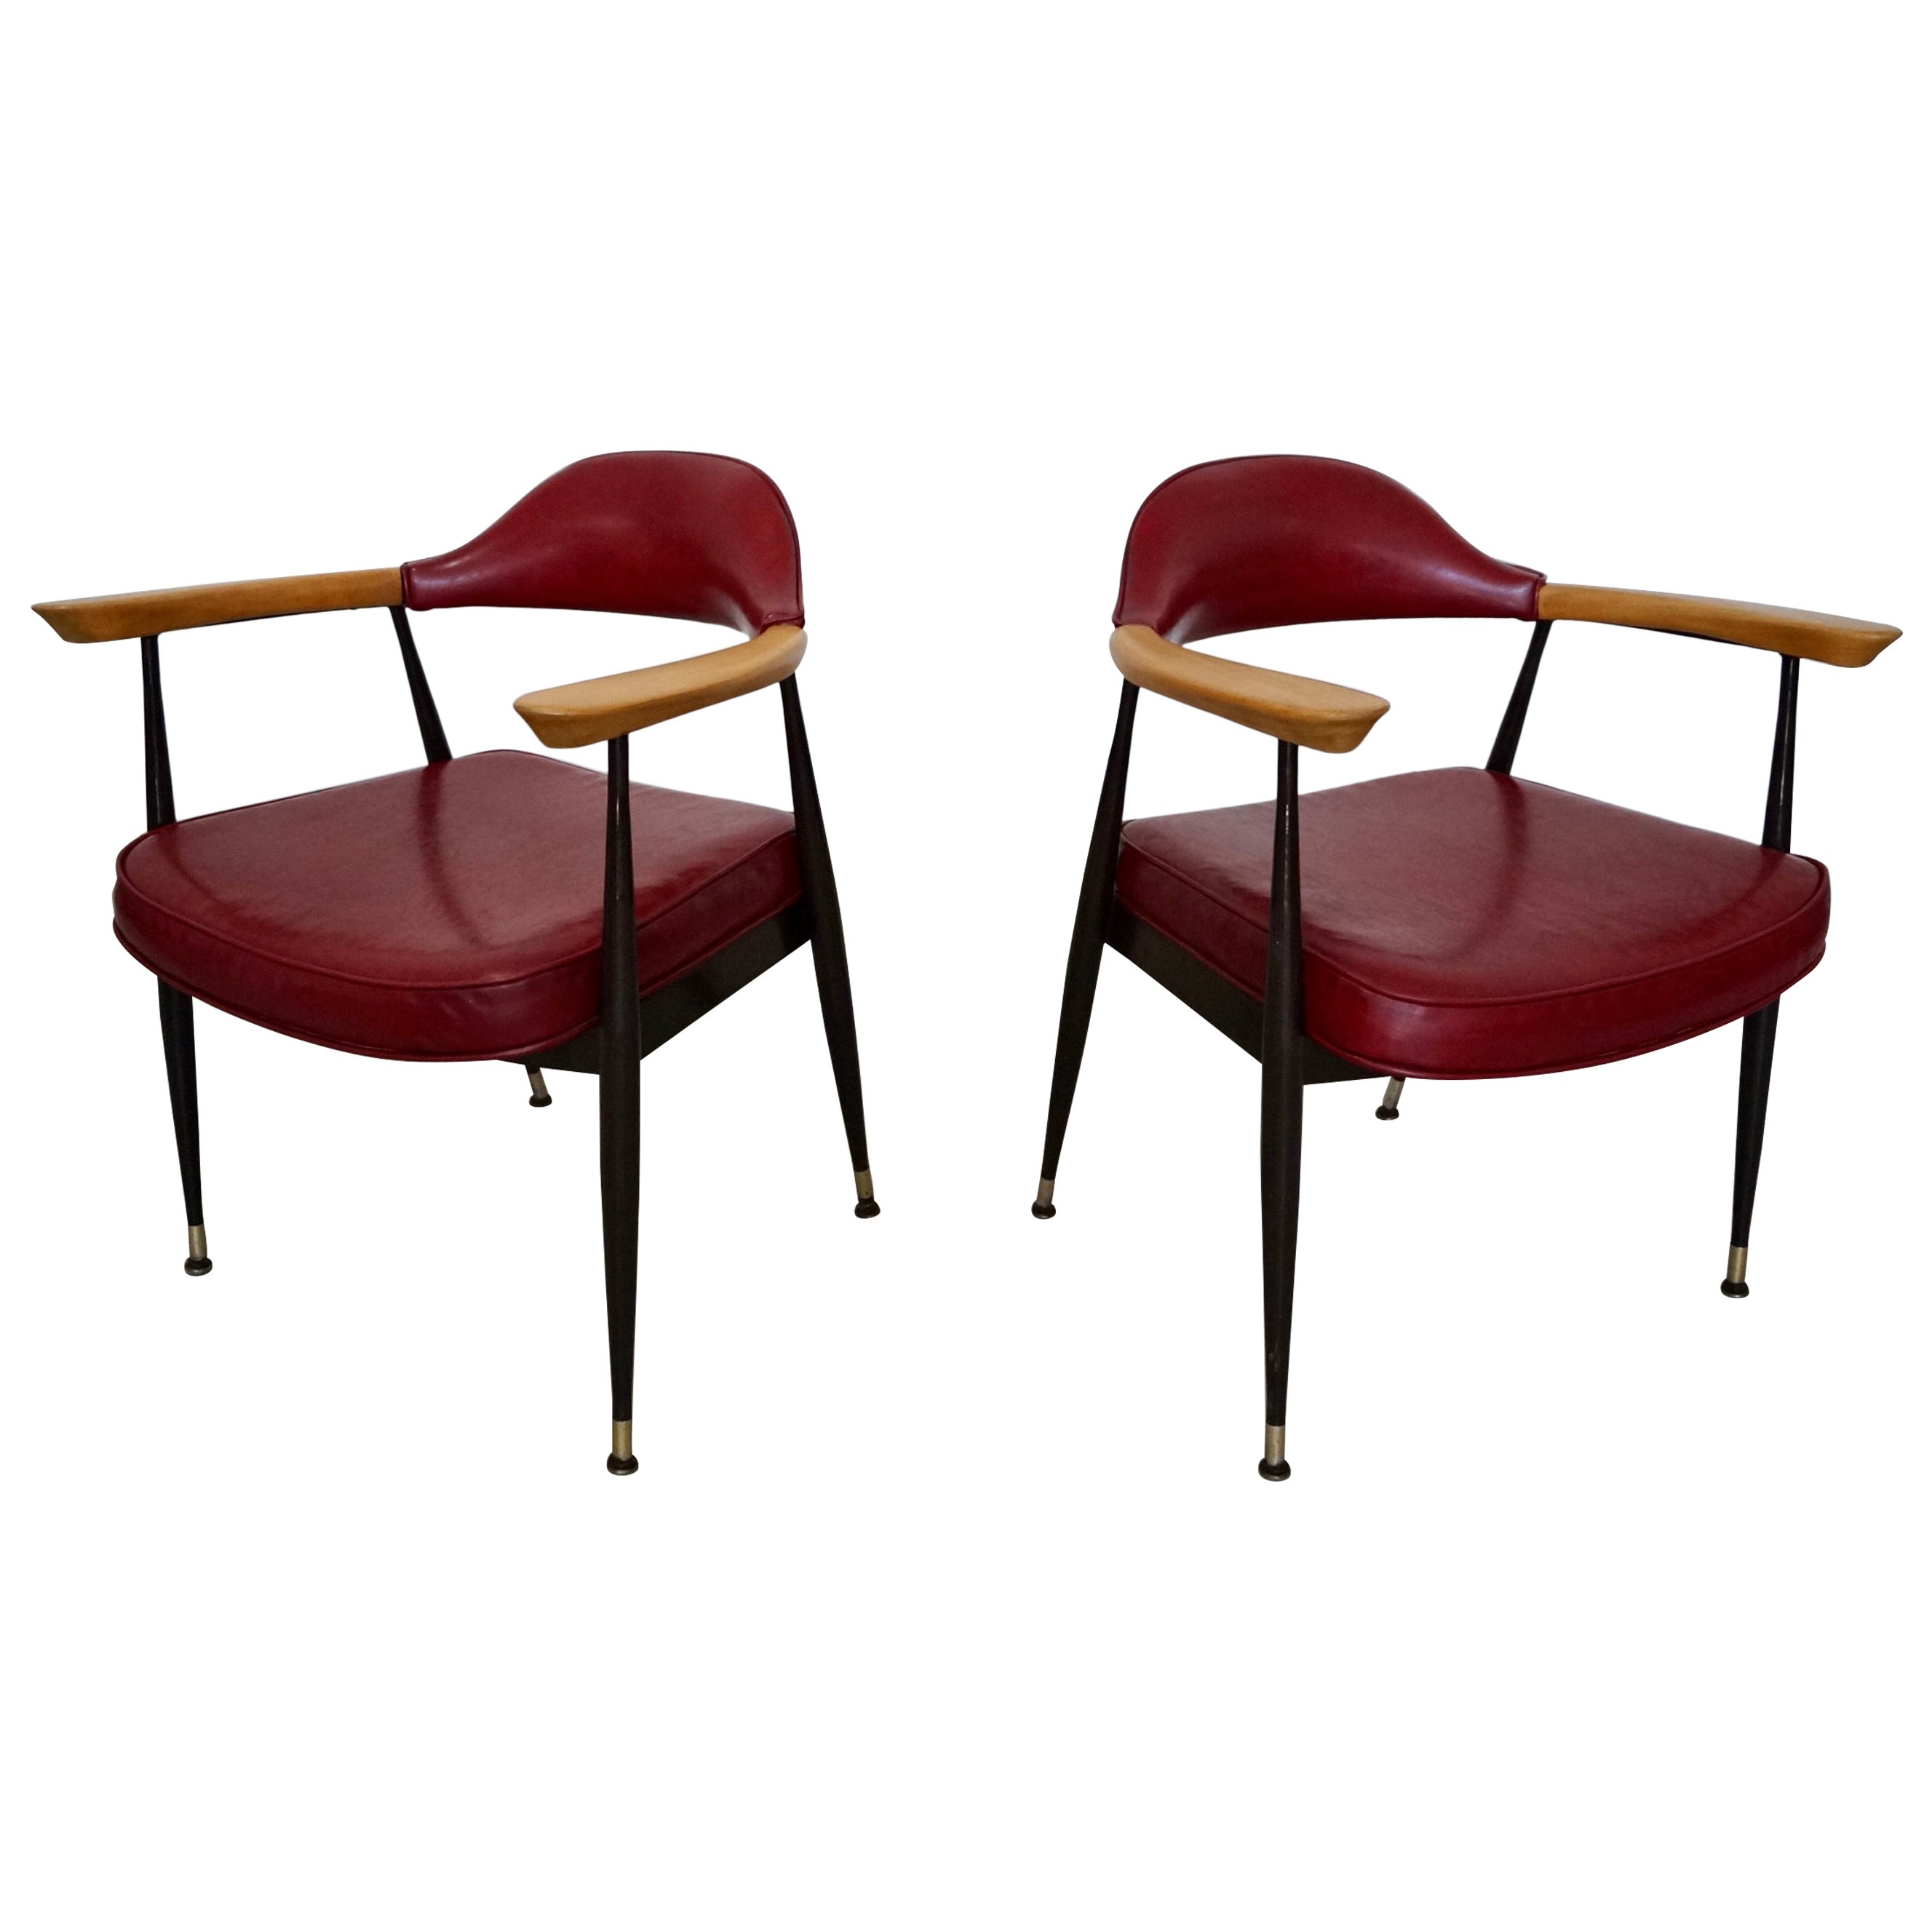 1970's Mid-Century Modern Metal & Wood Armchairs - a Pair For Sale